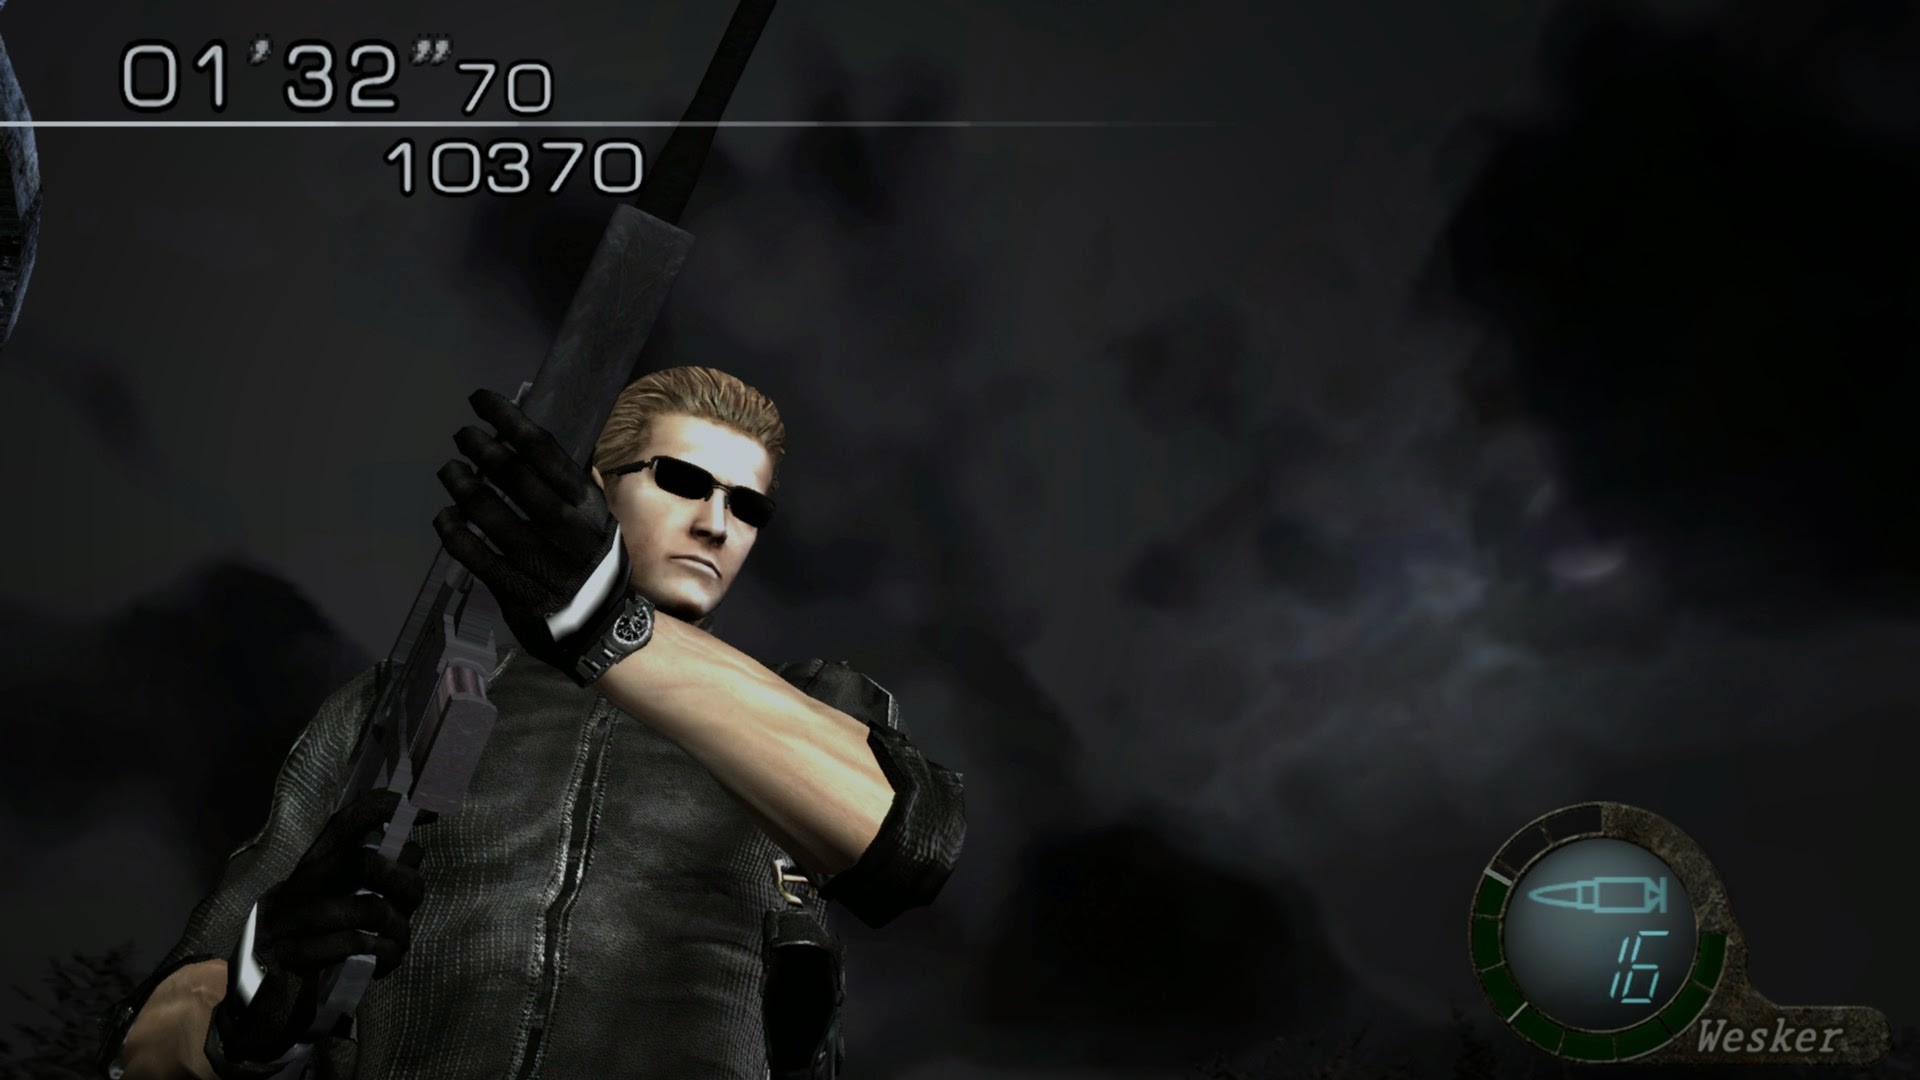 1920x1080 And well they can say Wesker in RE5 now for RE4 UHD with HD textures and  aggregate effects to be assimilated more to RE5 screenshots: